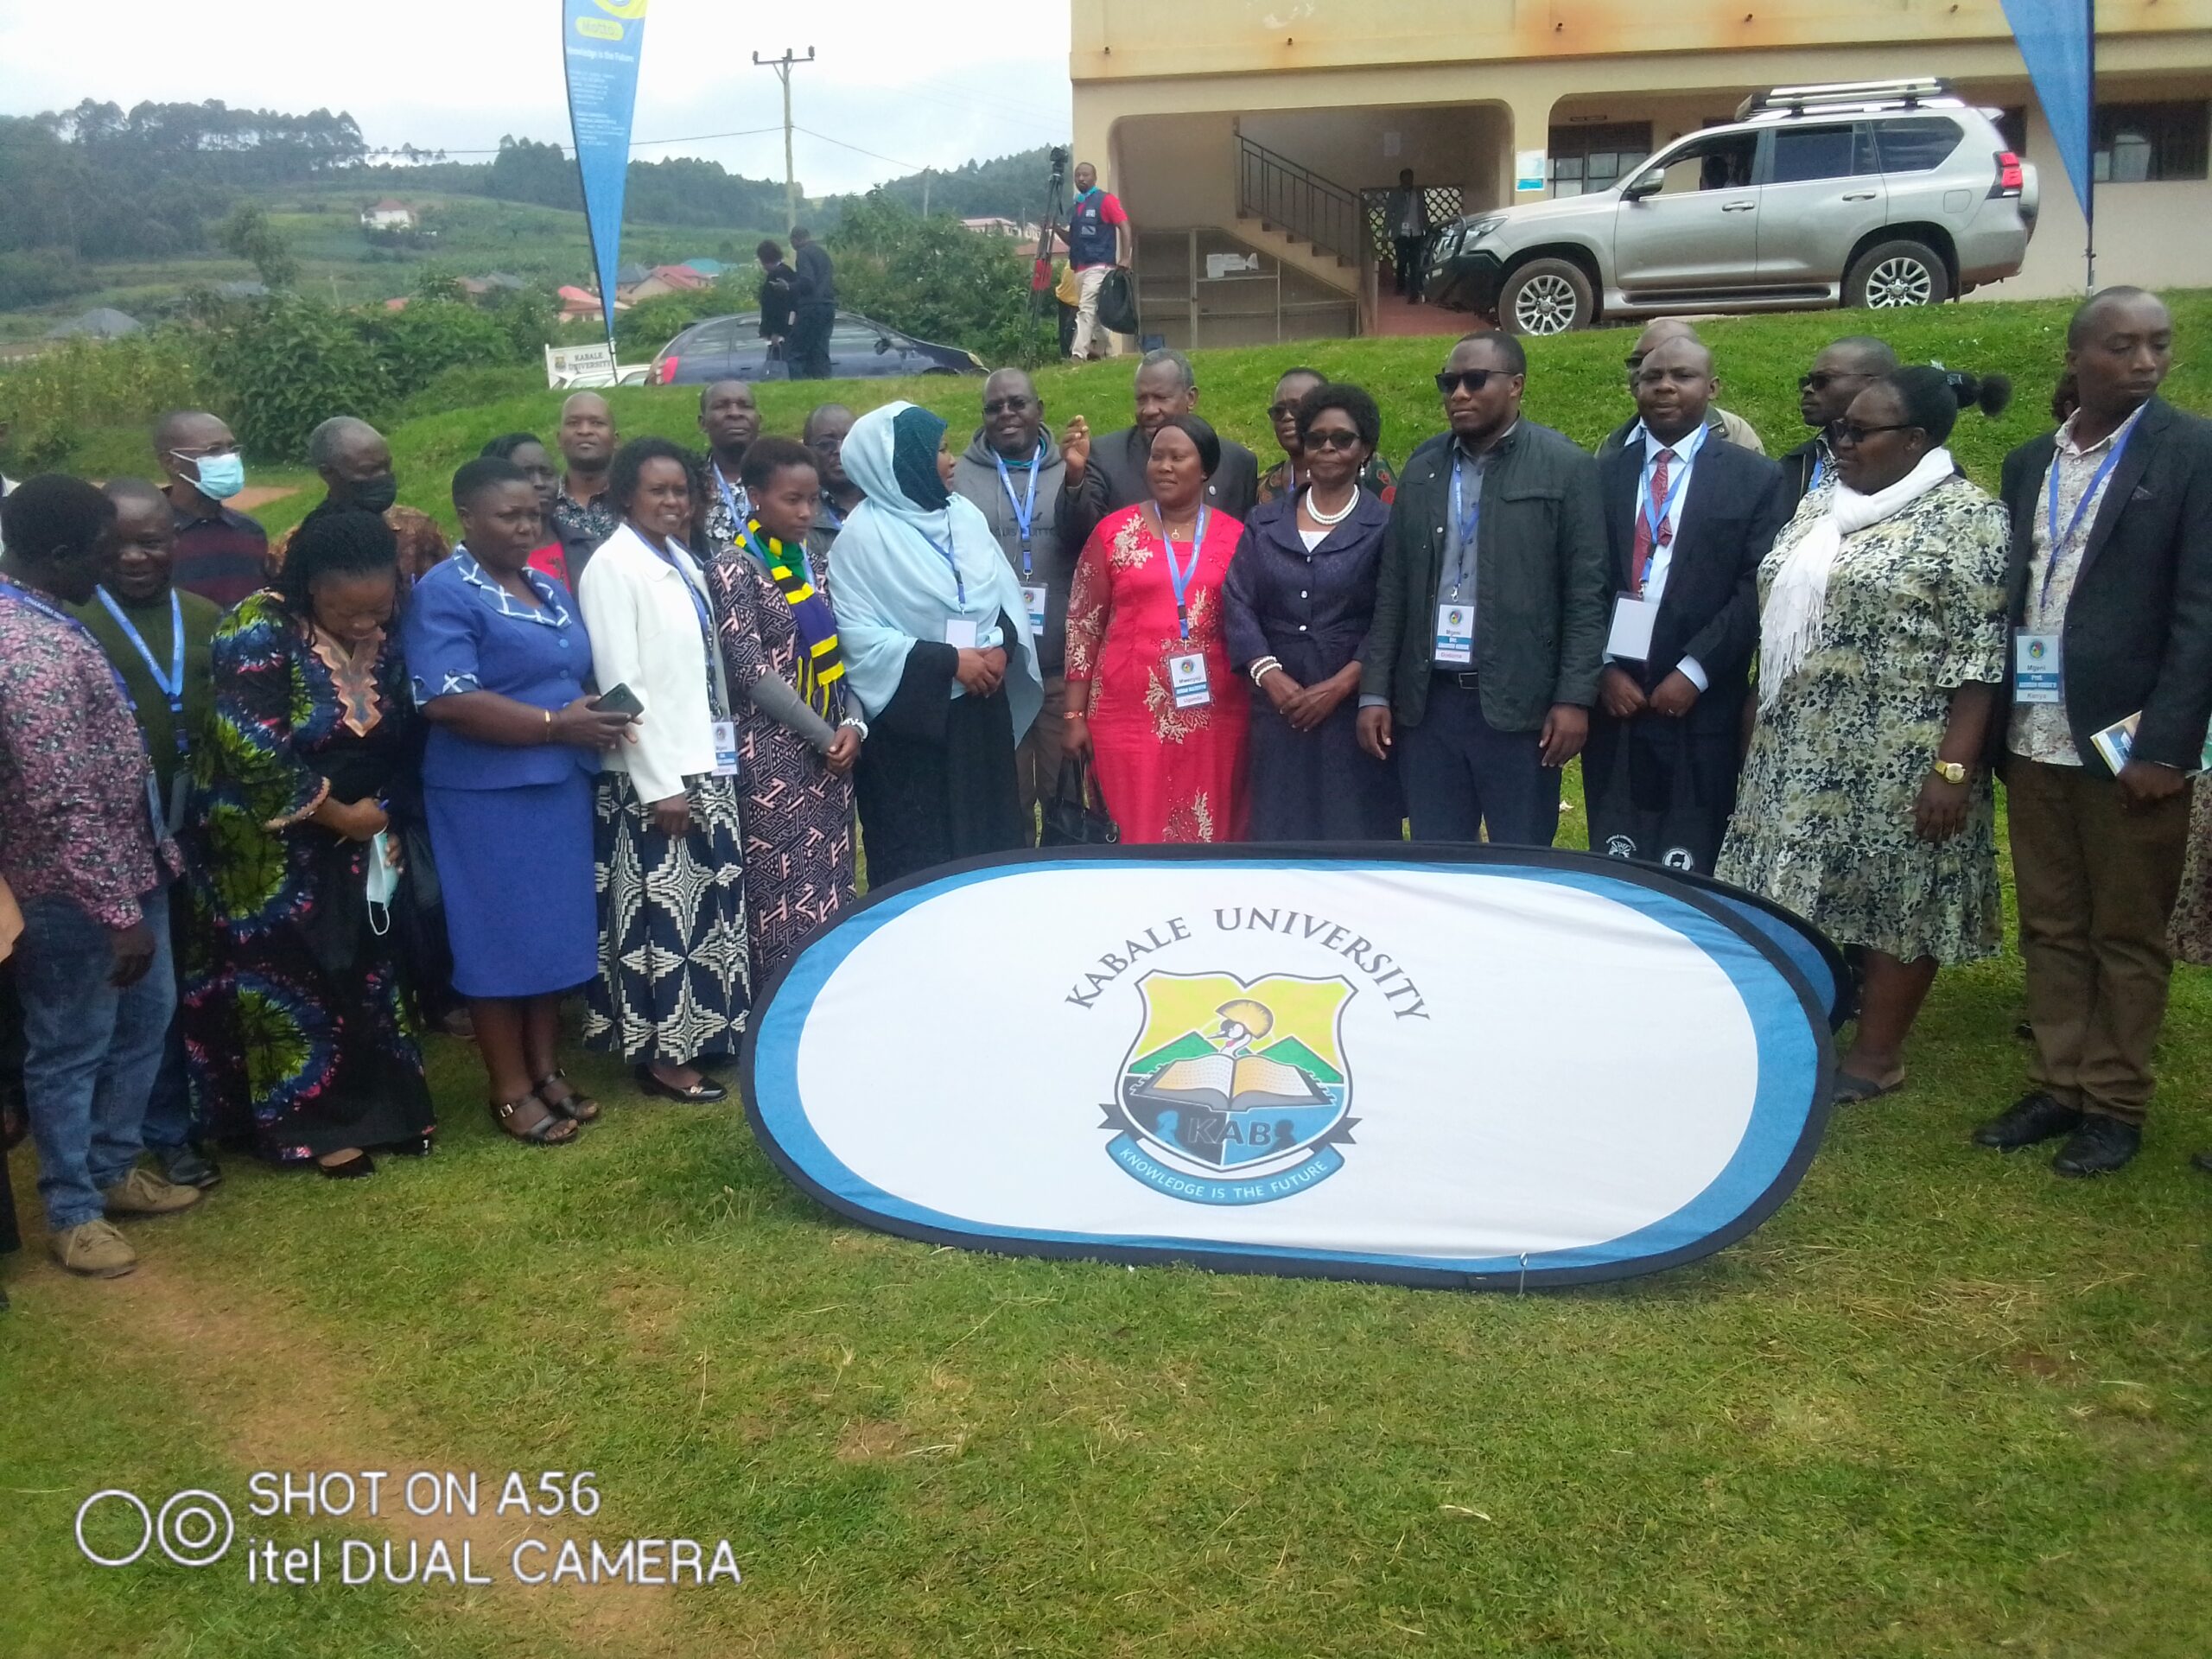 participants at the official opening of a two-day international Kiswahili Conference at kabale University